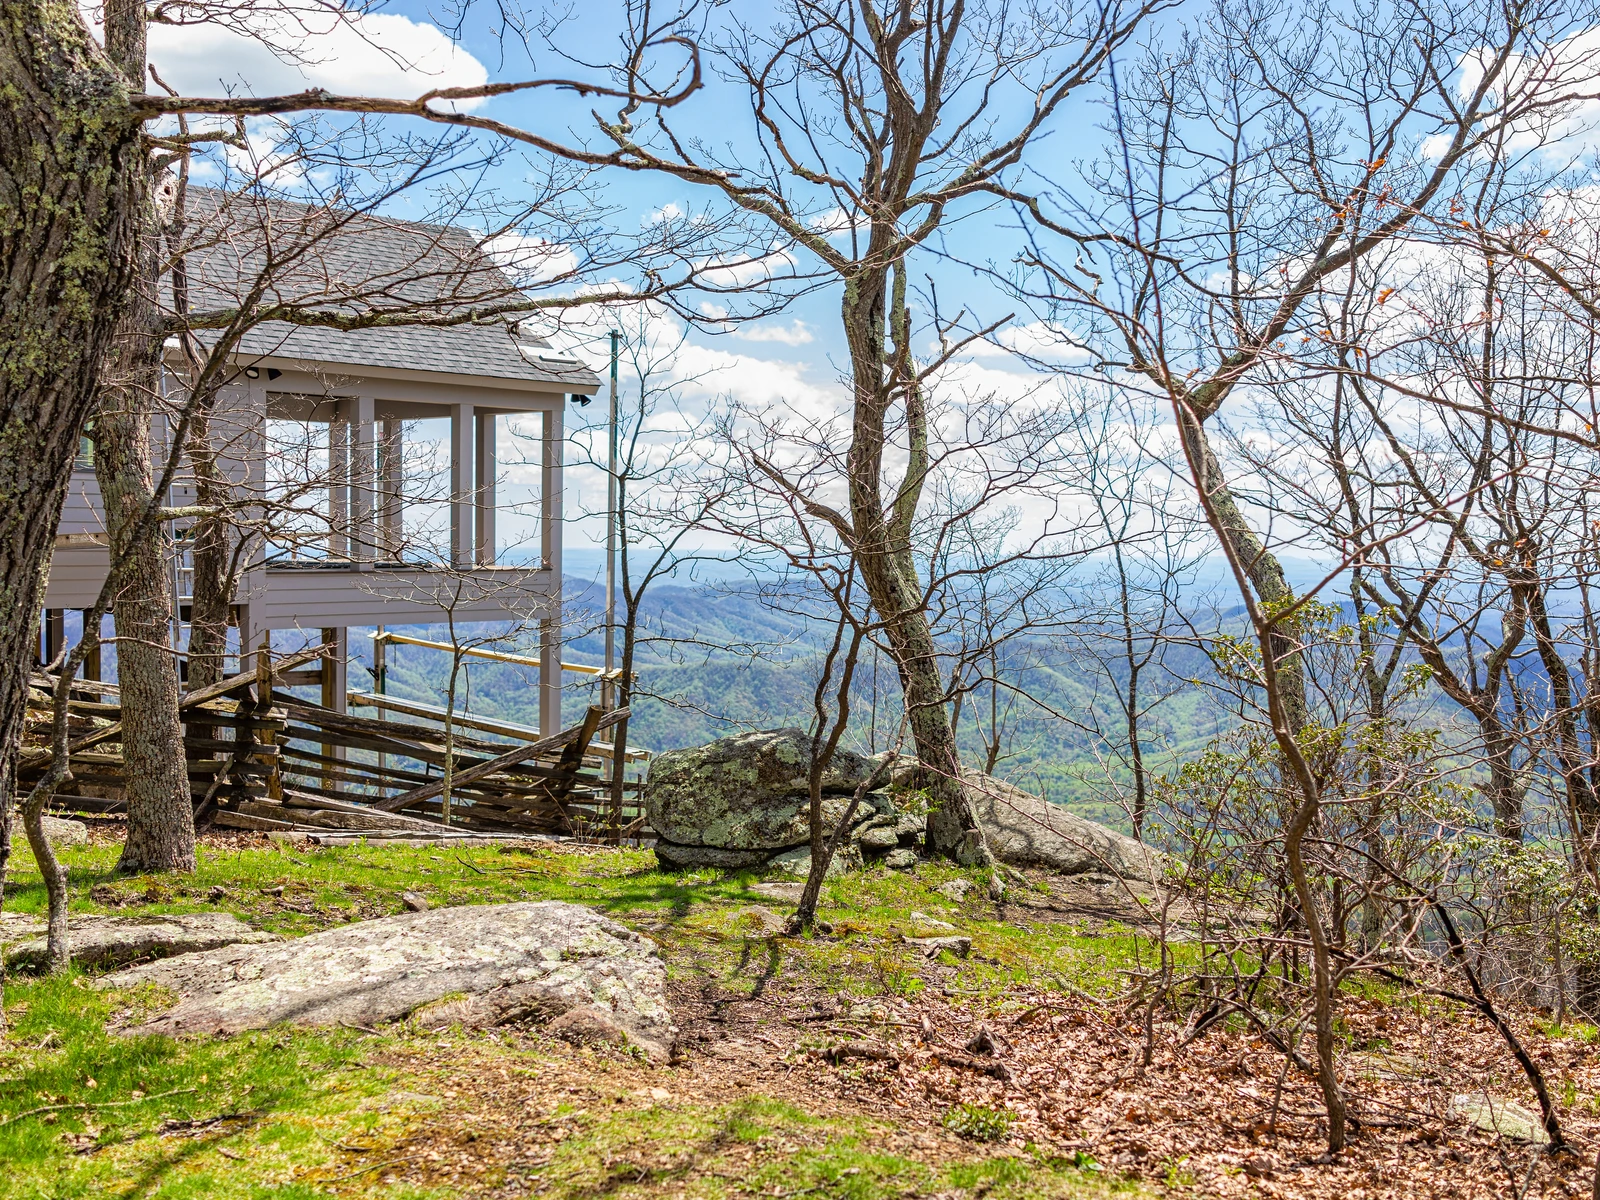 Single family mountain vacation rental pictured for a piece on the best Airbnbs in Virginia